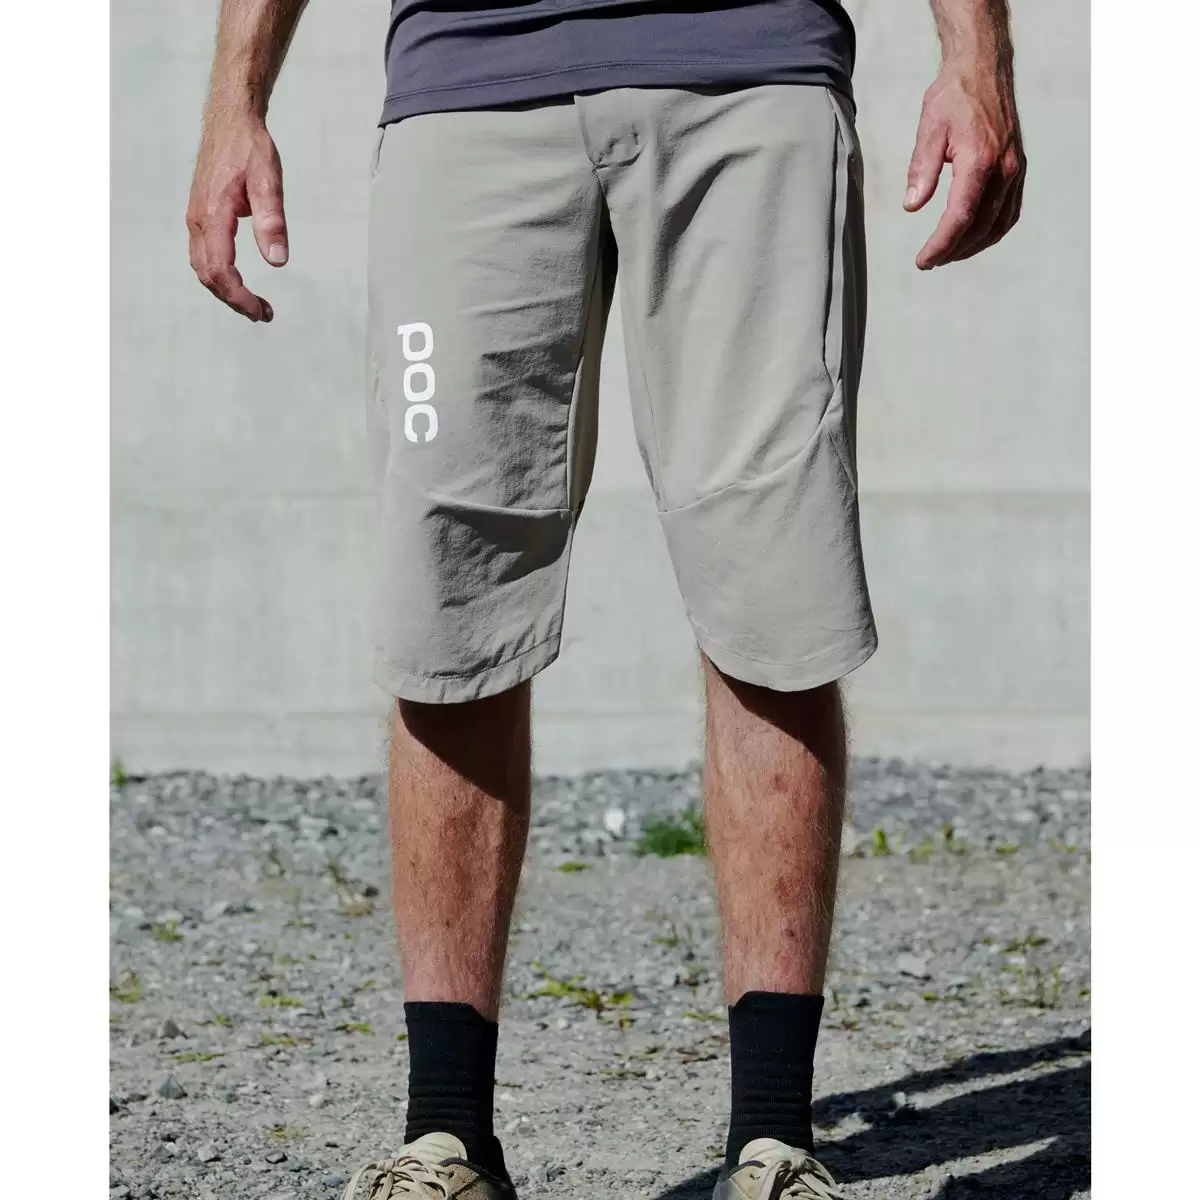 M's Infinite All-mountain shorts Moonstone Grey size M #3